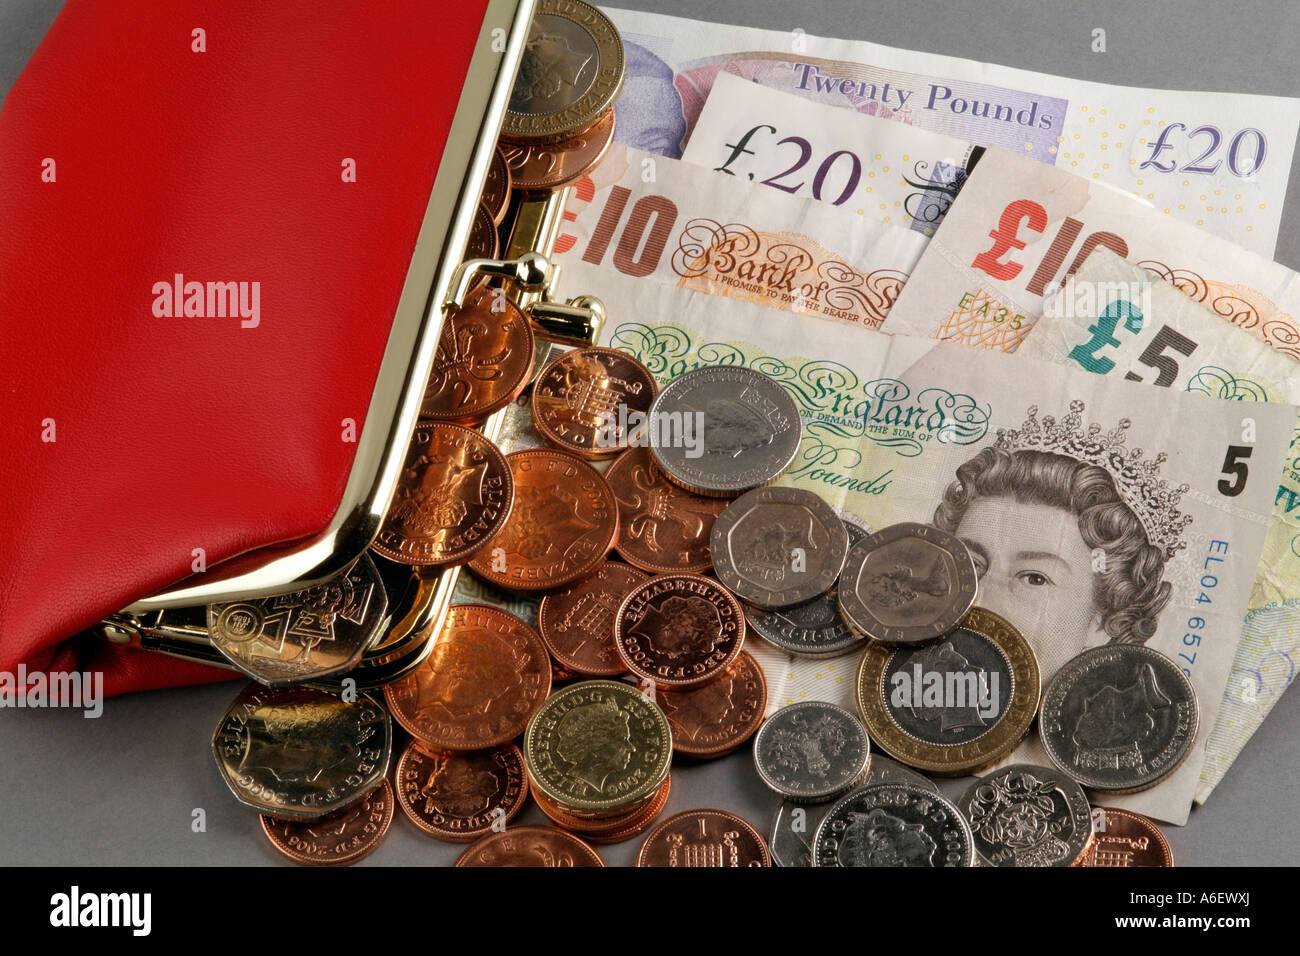 Money and a red leather purse Cash Loose change Silver and copper coloured coins Notes United Kingdom coinage of the realm Stock Photo